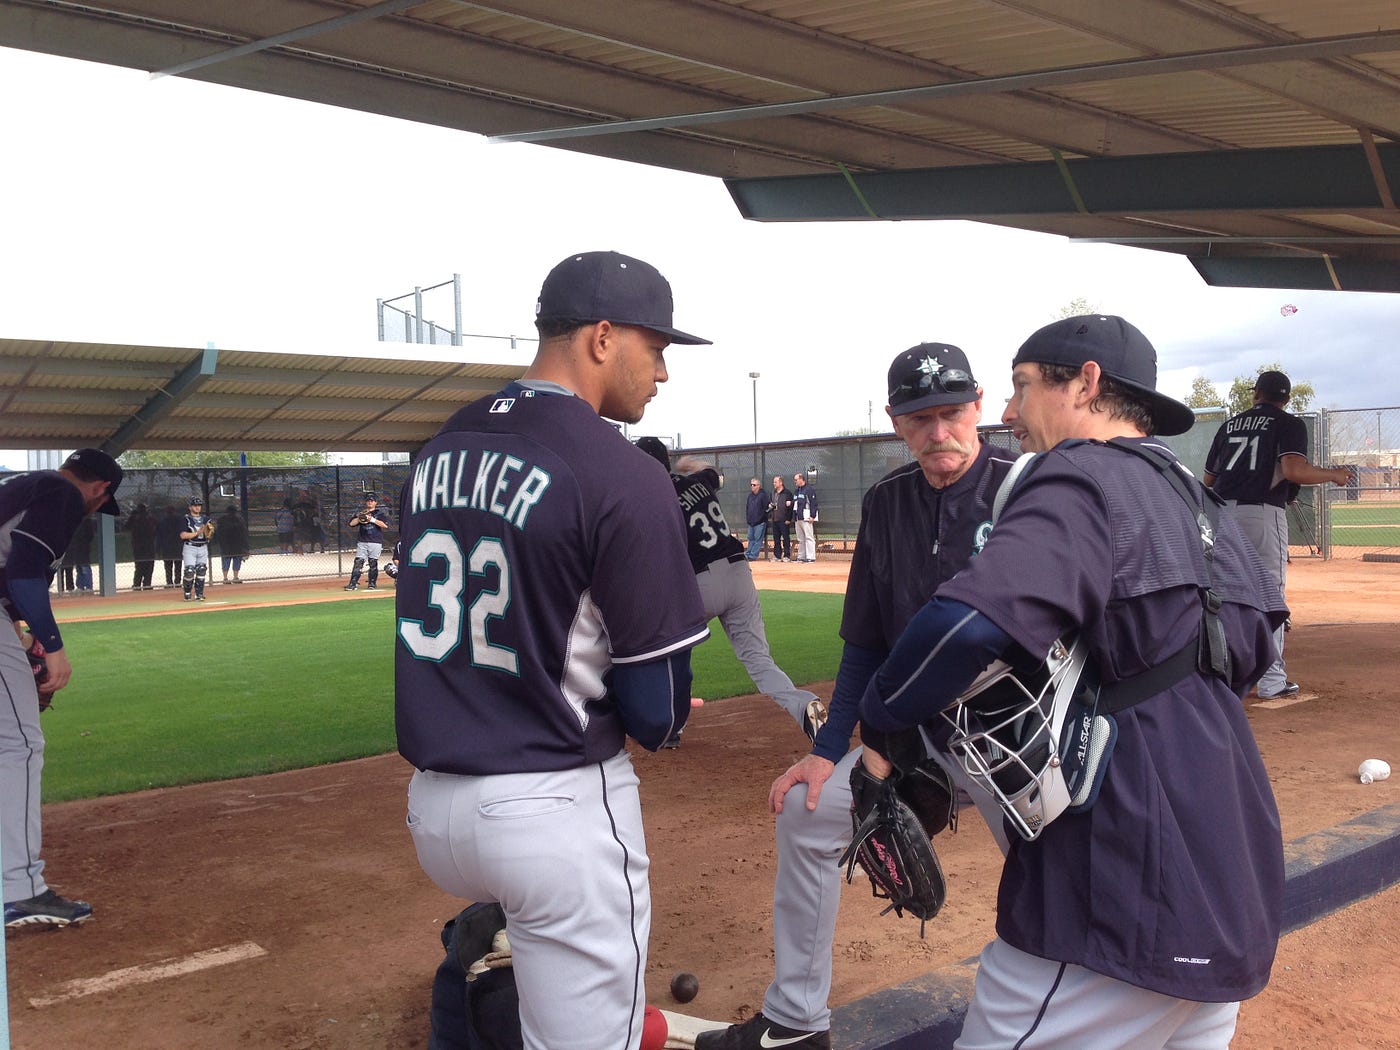 Mariners Spring Training Update — Day 4, by Mariners PR